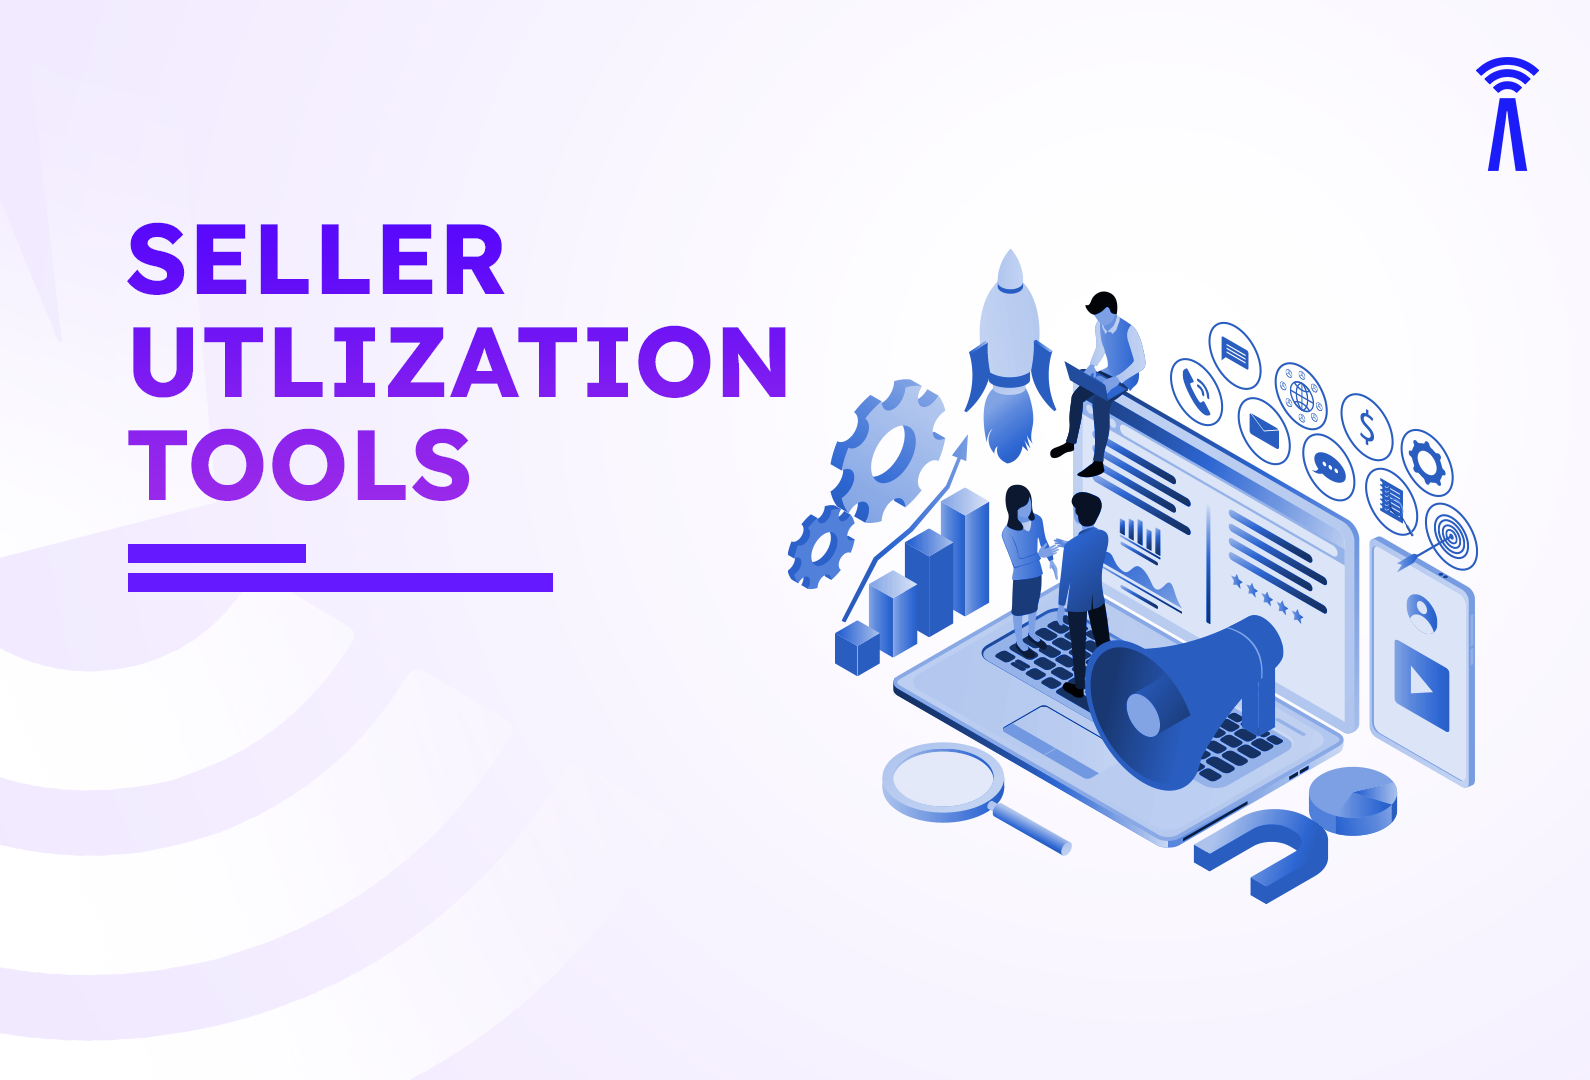 Seller utilization on tools starts with buy-in on WHY, not HOW.